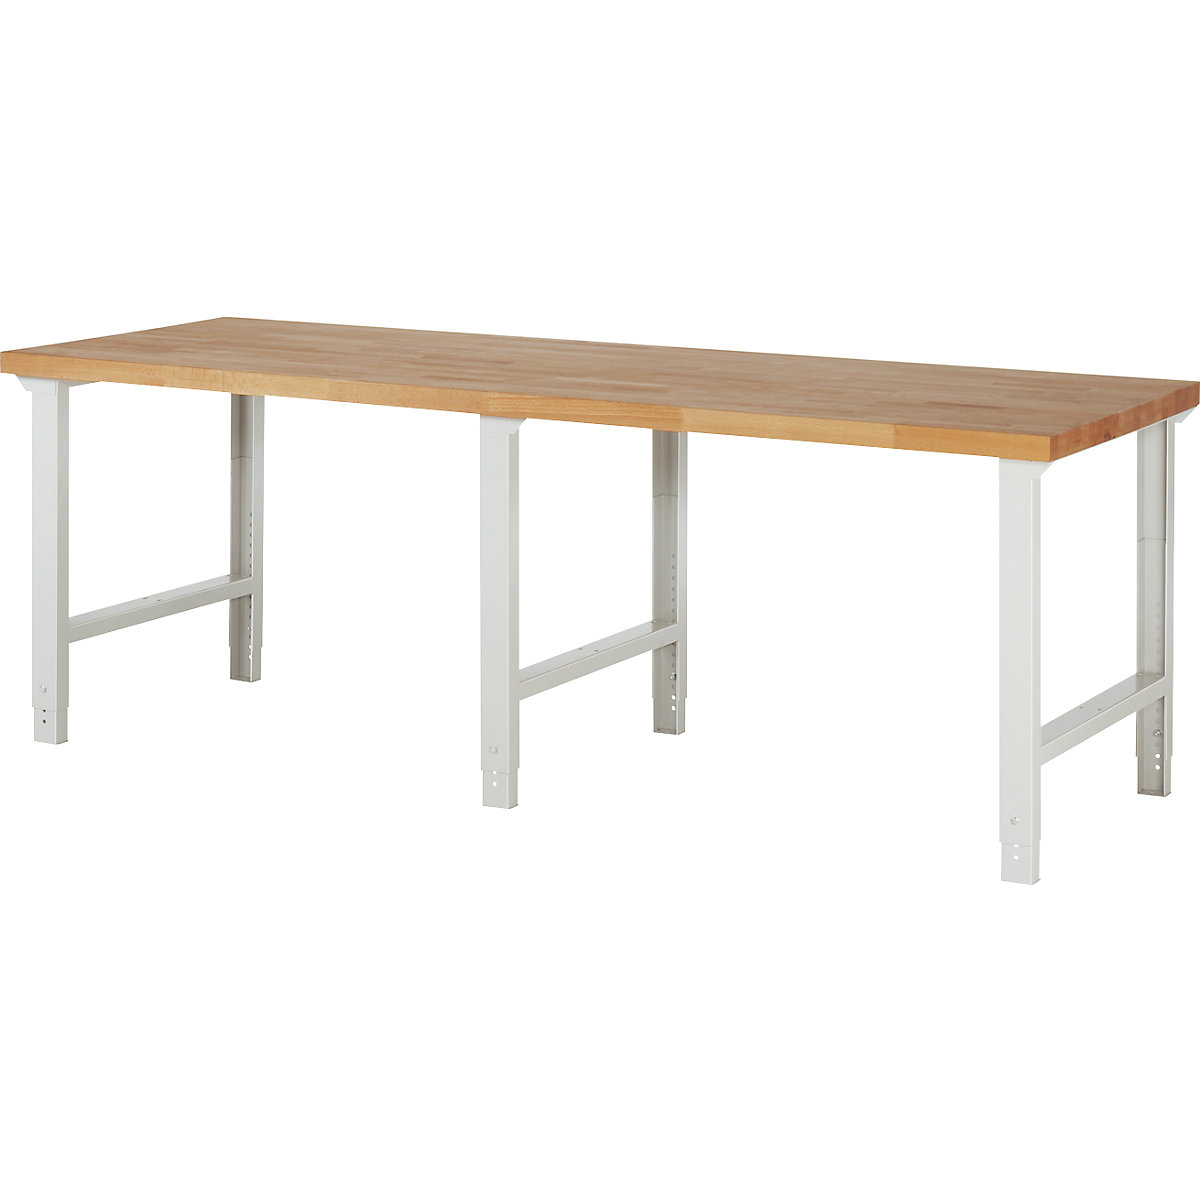 Workbench, Series 7 modular system – eurokraft pro, without substructure, extra wide, WxD 2500 x 900 mm-1